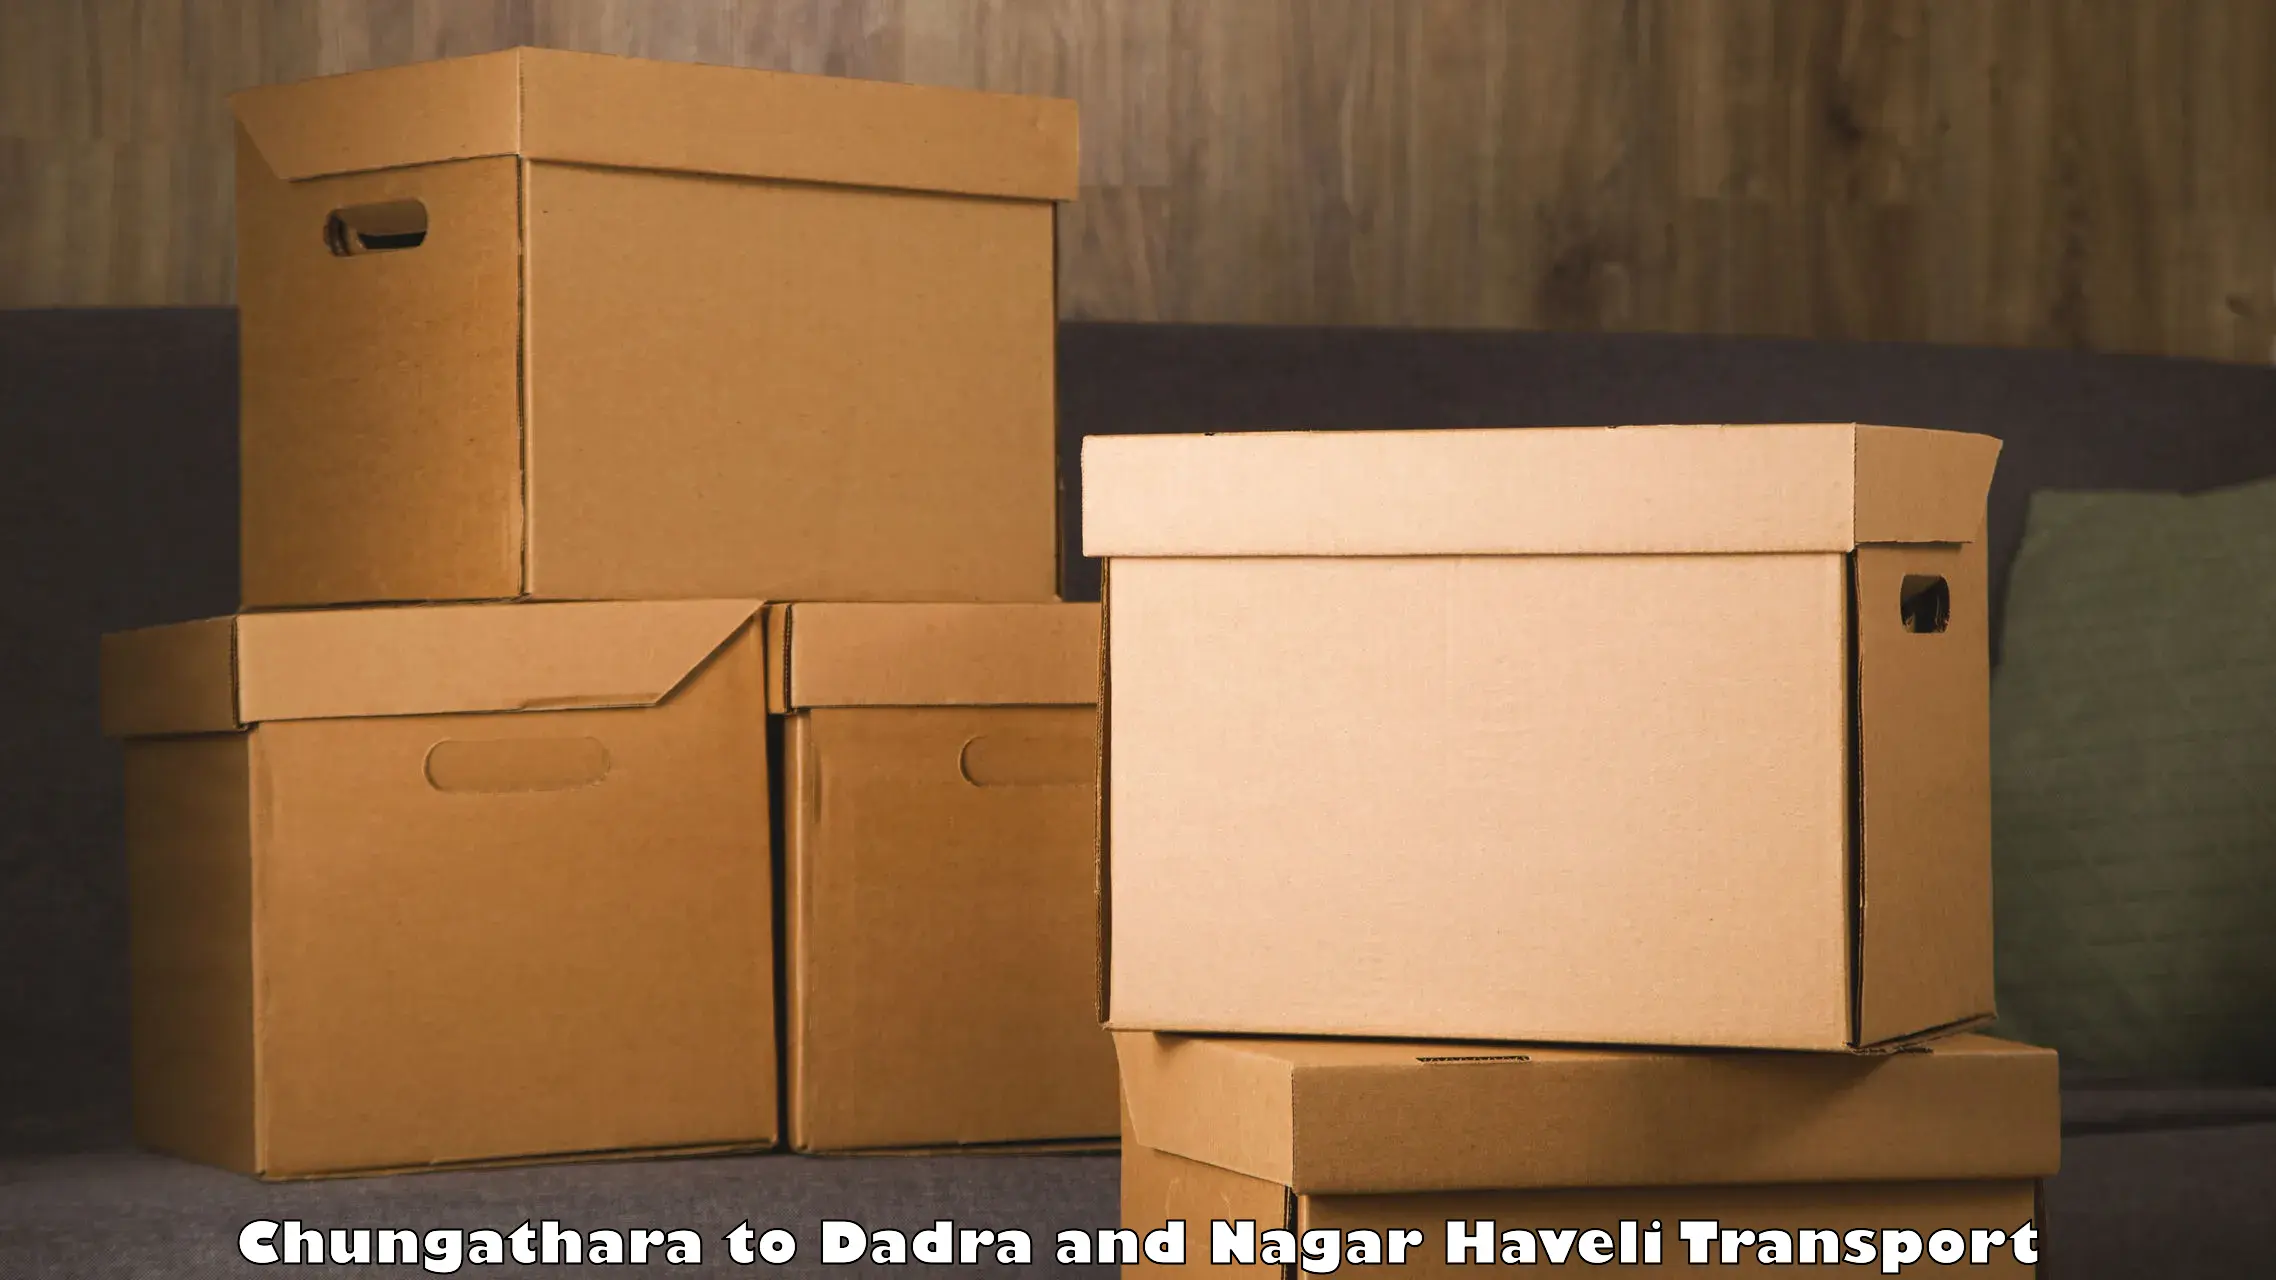 Parcel transport services in Chungathara to Dadra and Nagar Haveli